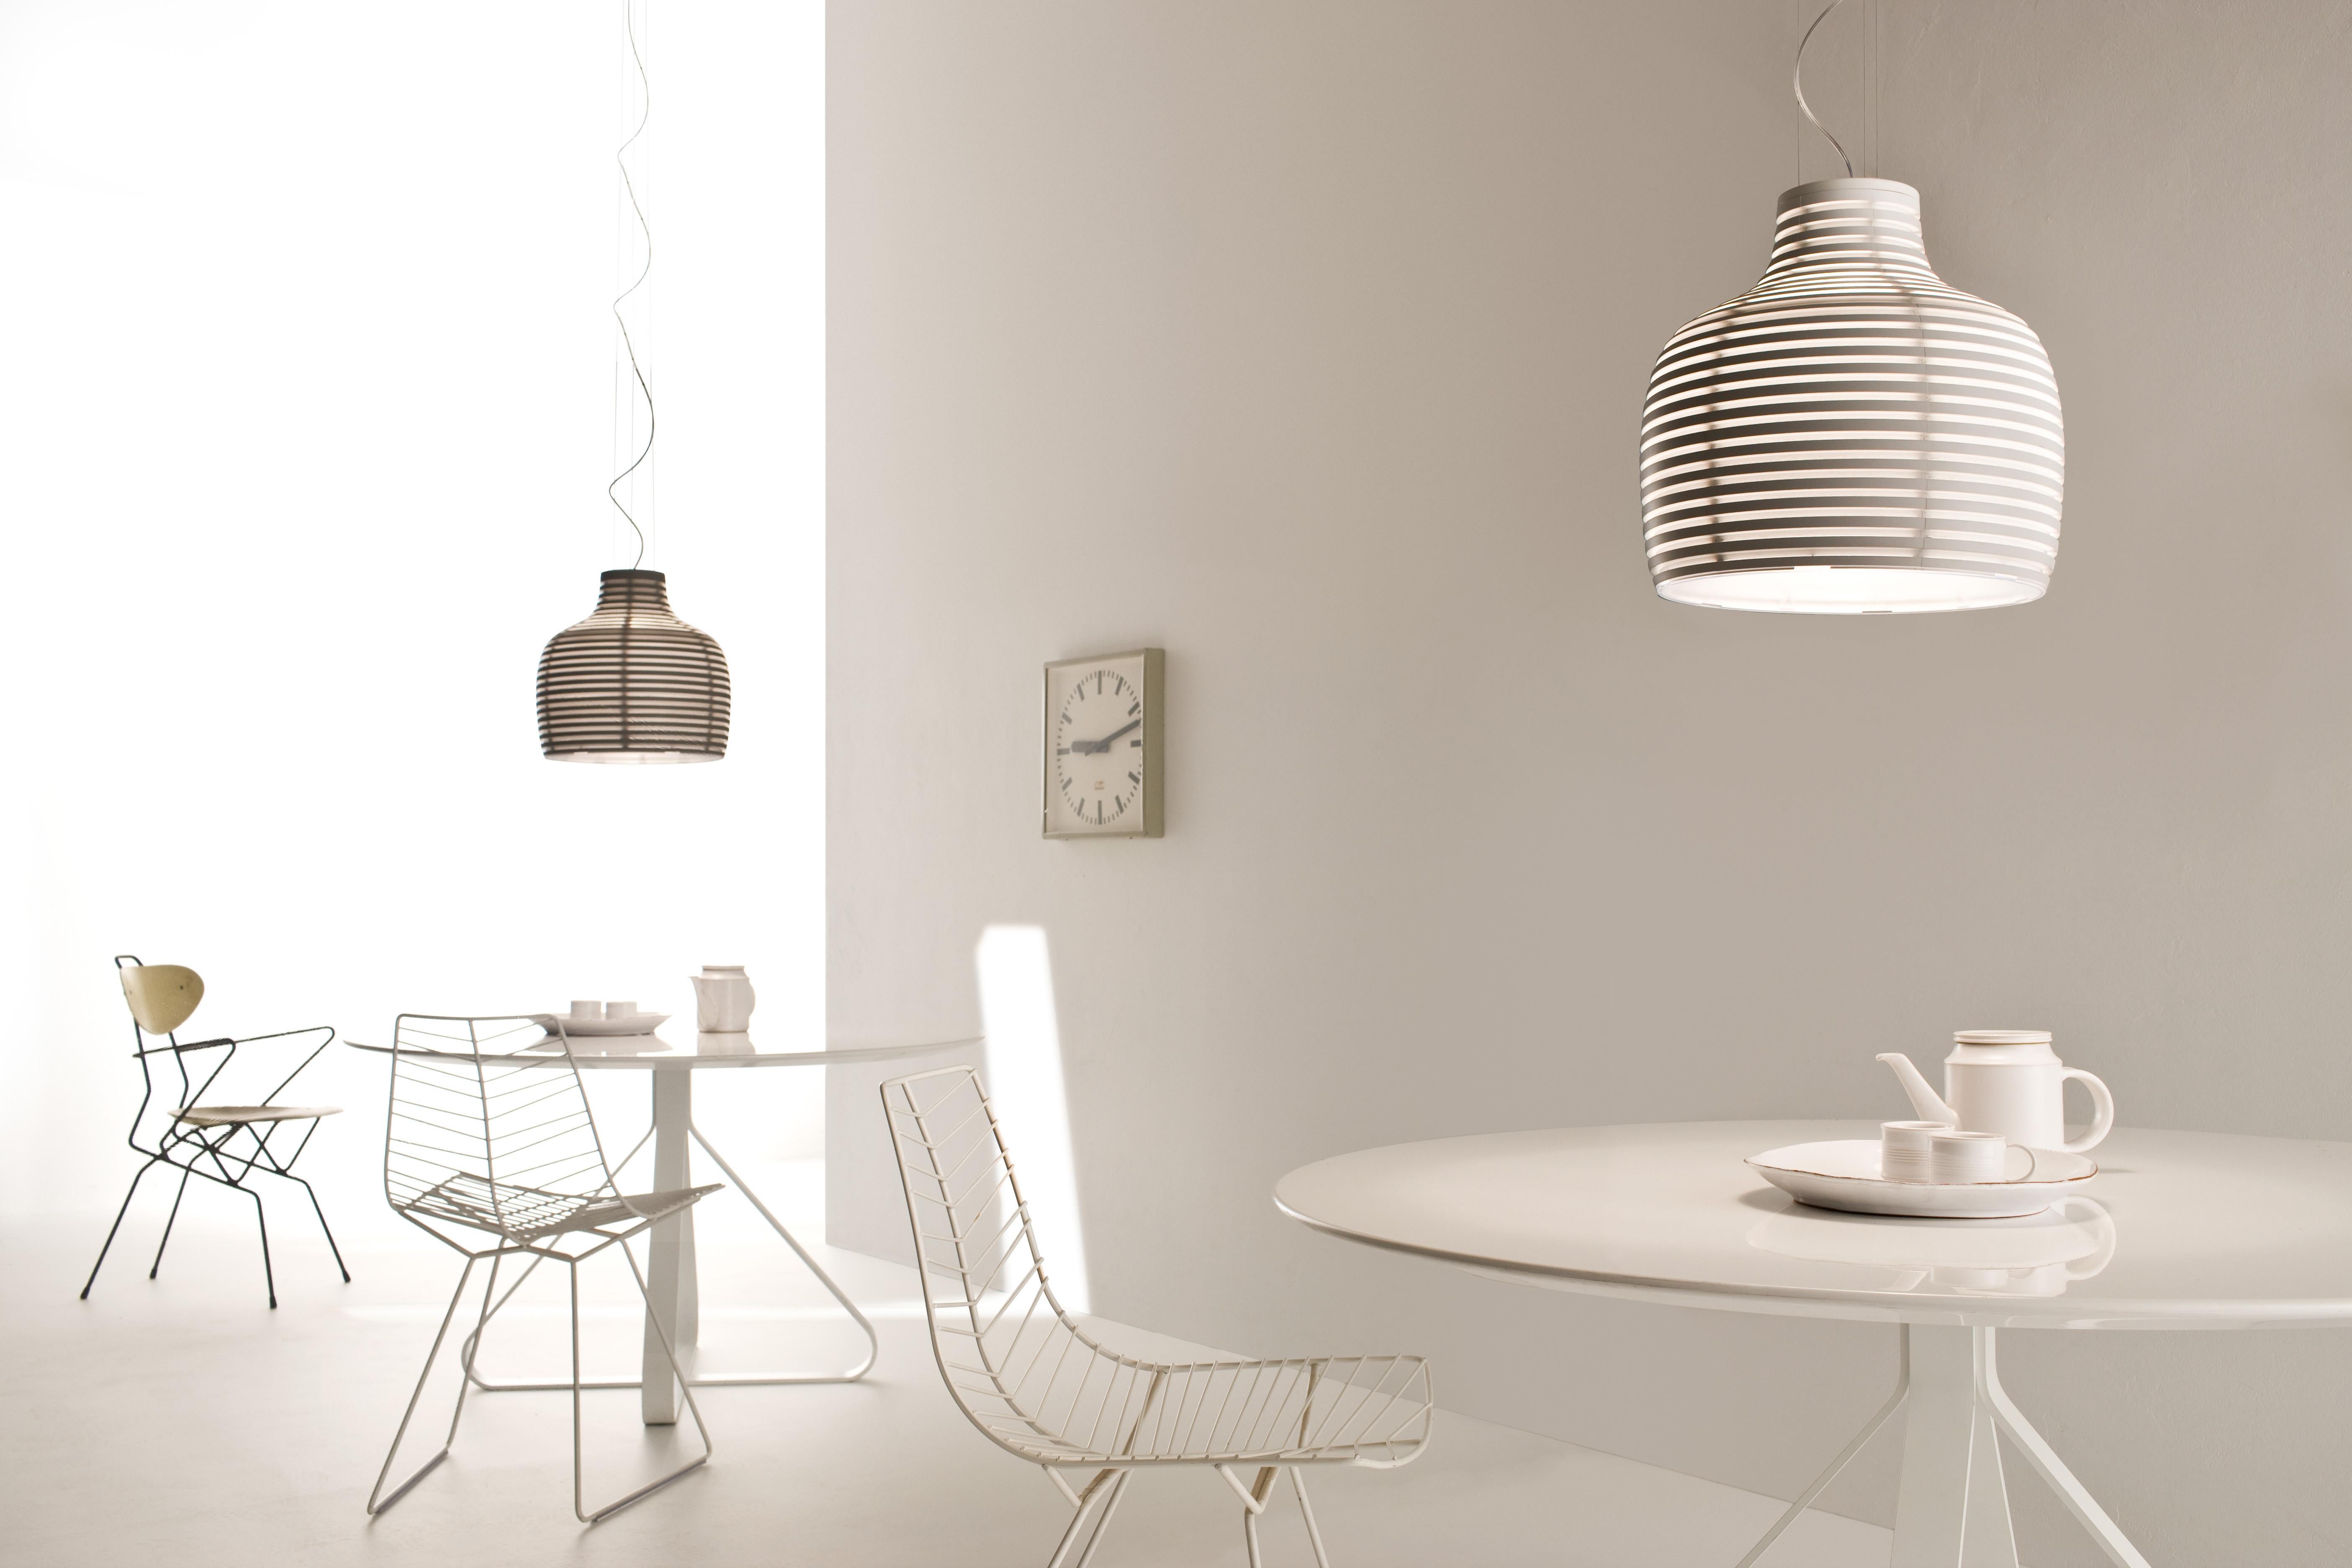 Suspension lamp with diffused and direct light. Matt injection molded batch-dyed ABS diffuser consisting of 6 assembled modules. Opaline polycarbonate internal diffuser with central hole that conceals the technical components and leaves the light